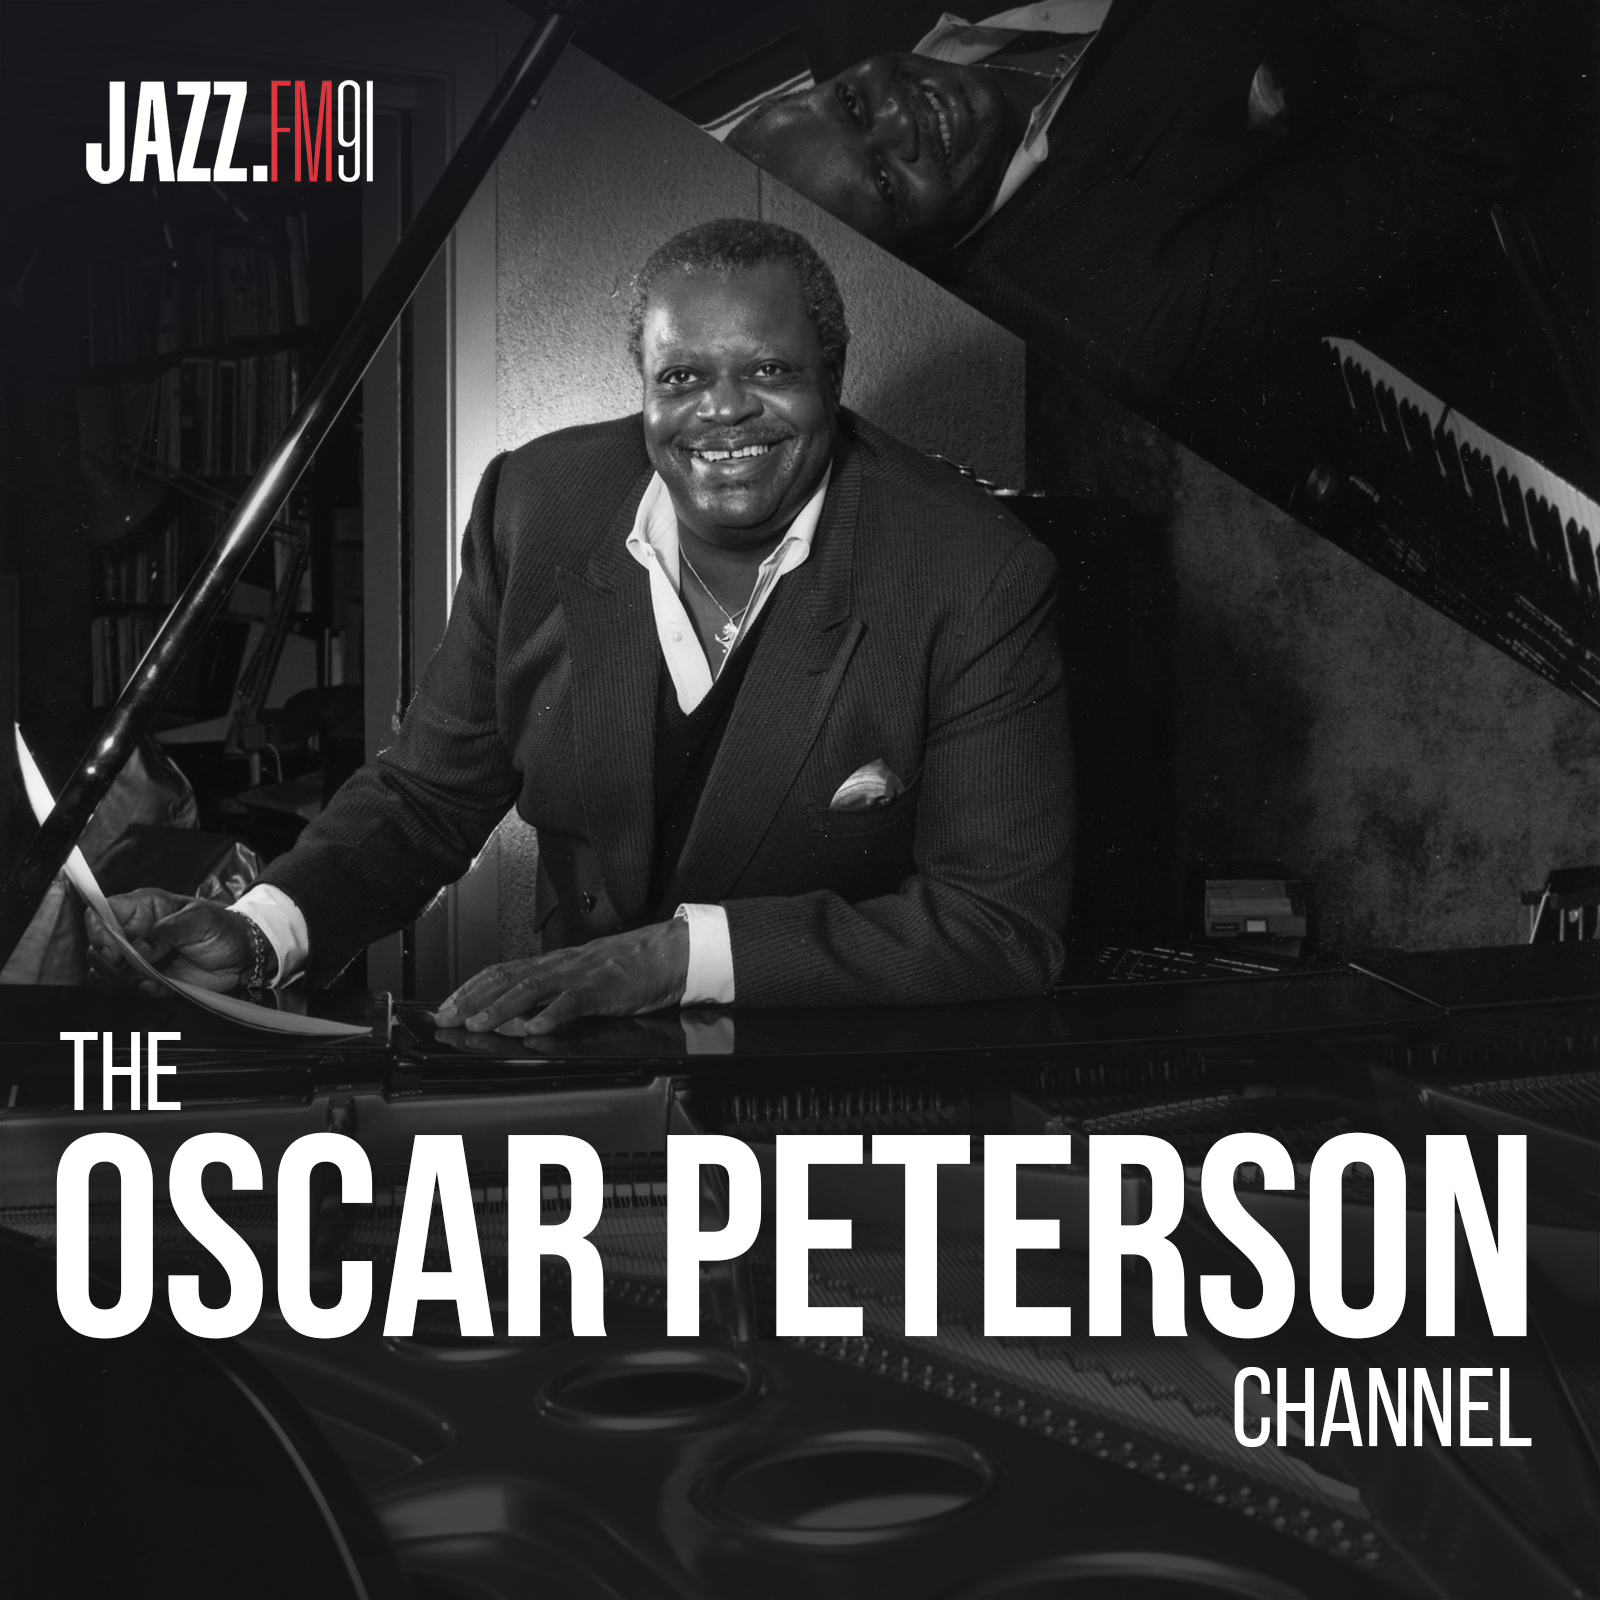 The Oscar Peterson Channel